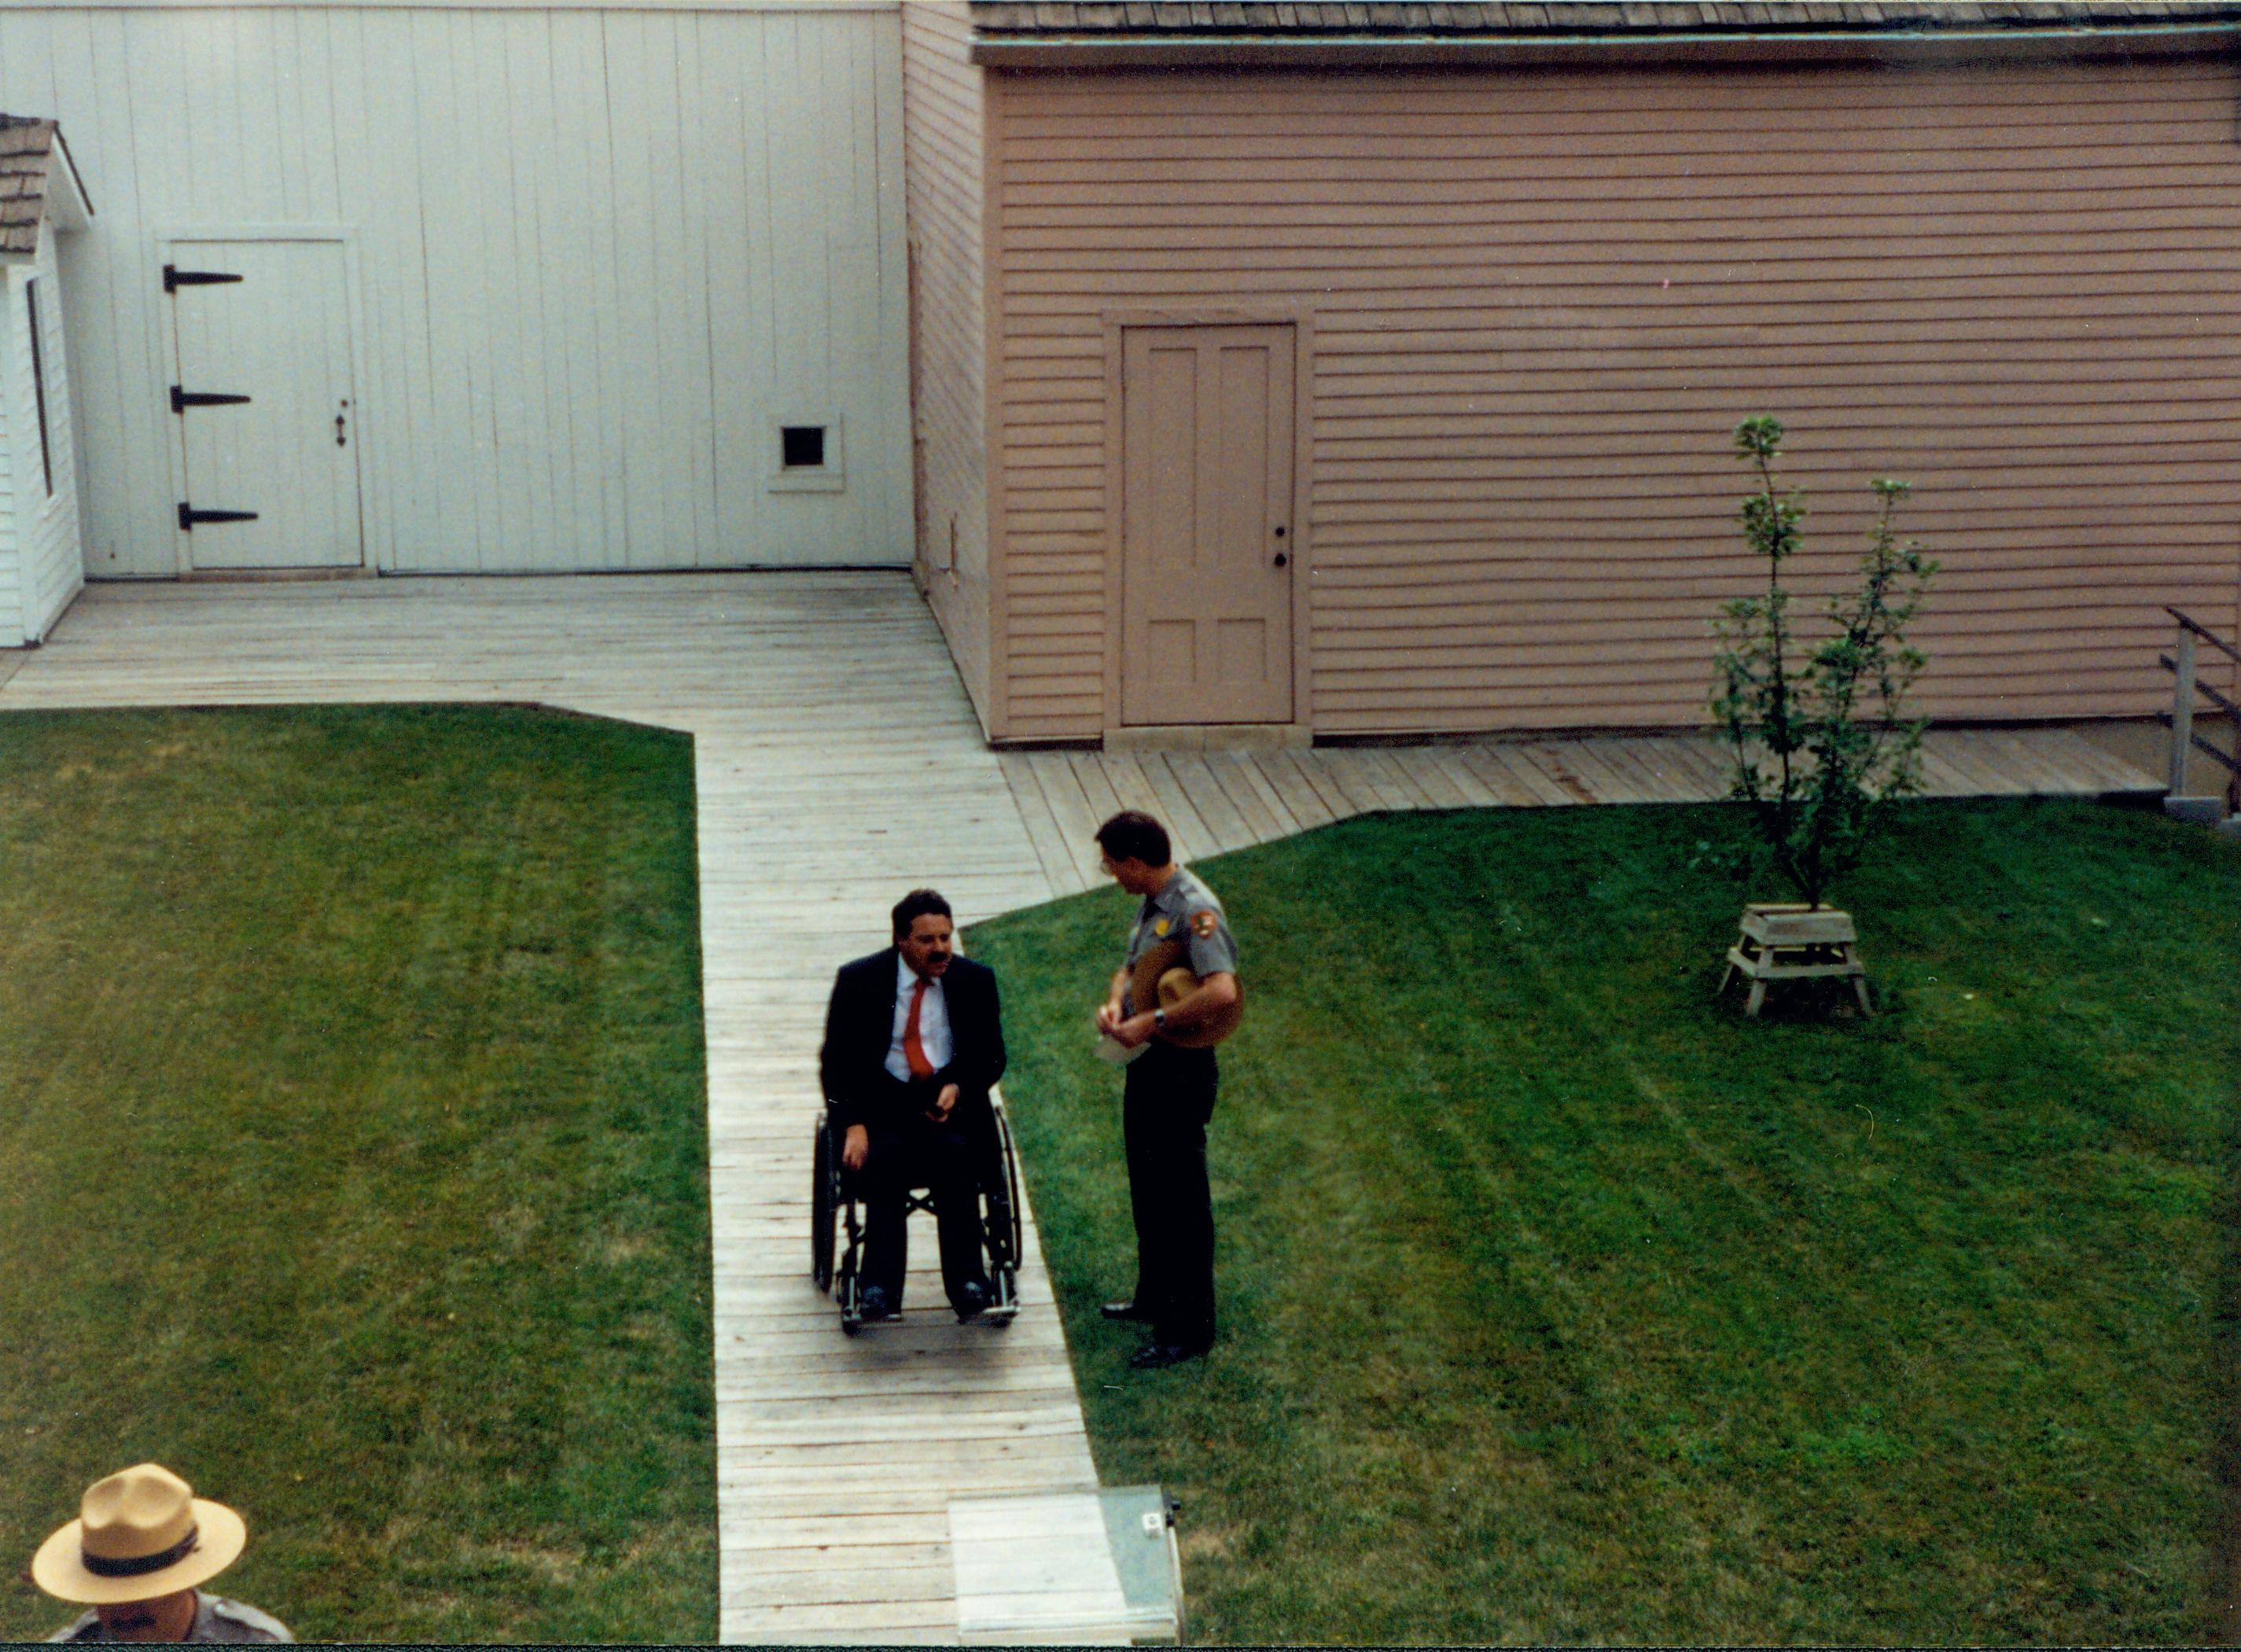 A man in a wheelchair waits on the Lincoln home back yard boardwalk while chatting with a Lincoln Home staff member. Photographer facing east.